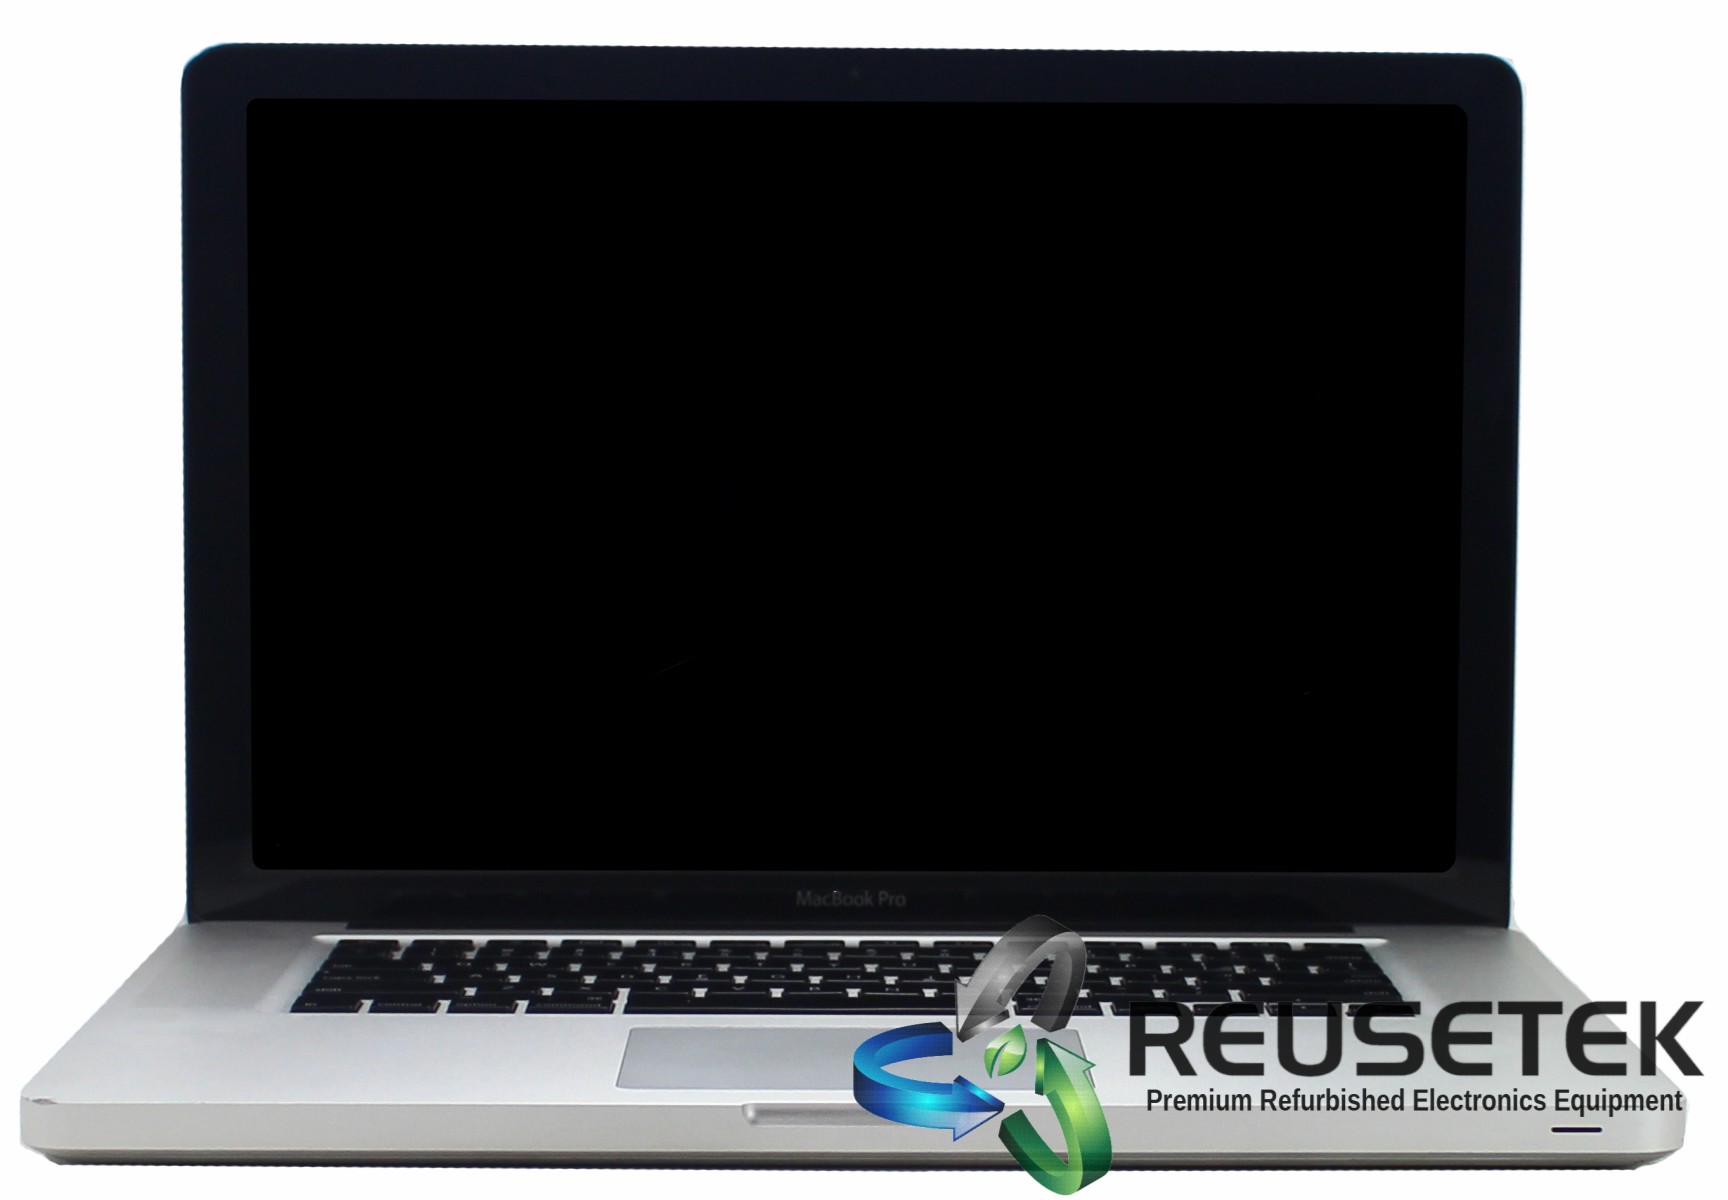 AMPA1286-Apple MacBook Pro 15" A1286 2.53GHz Core 2 Duo 4GB RAM 320GB HDD 10.11 Late 2008-image